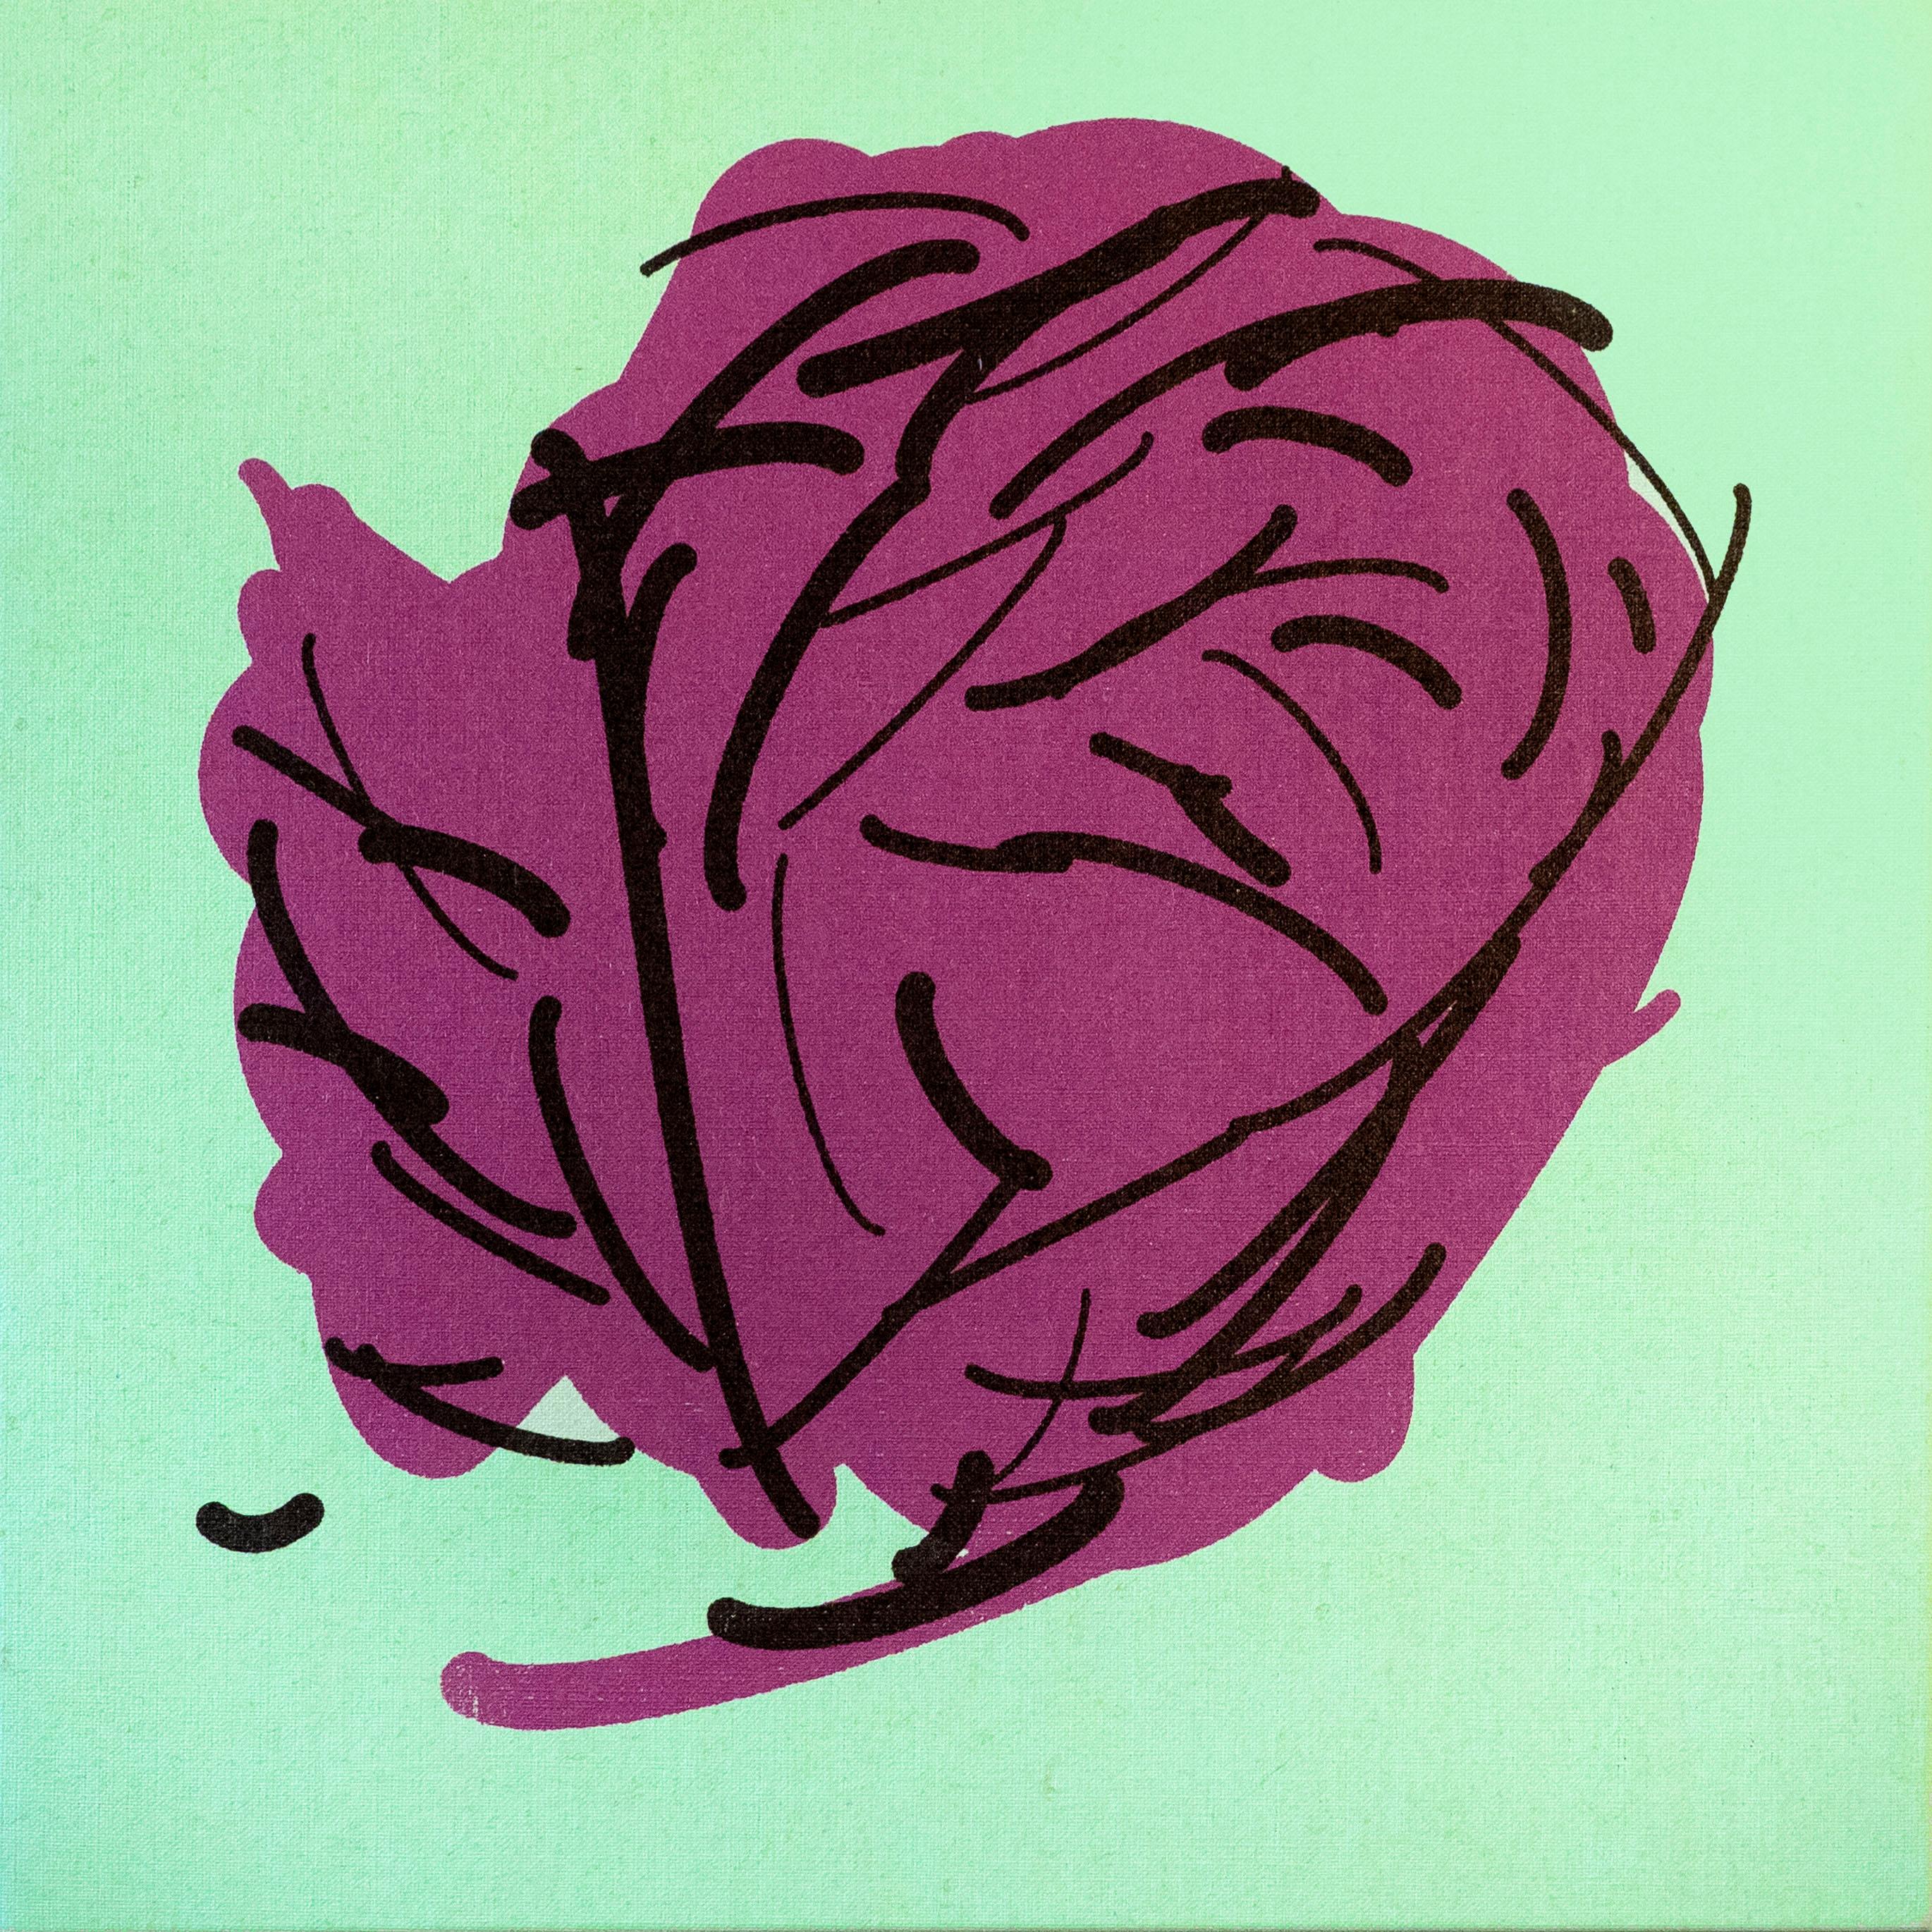 Purple Cabbage - Print by Tom White